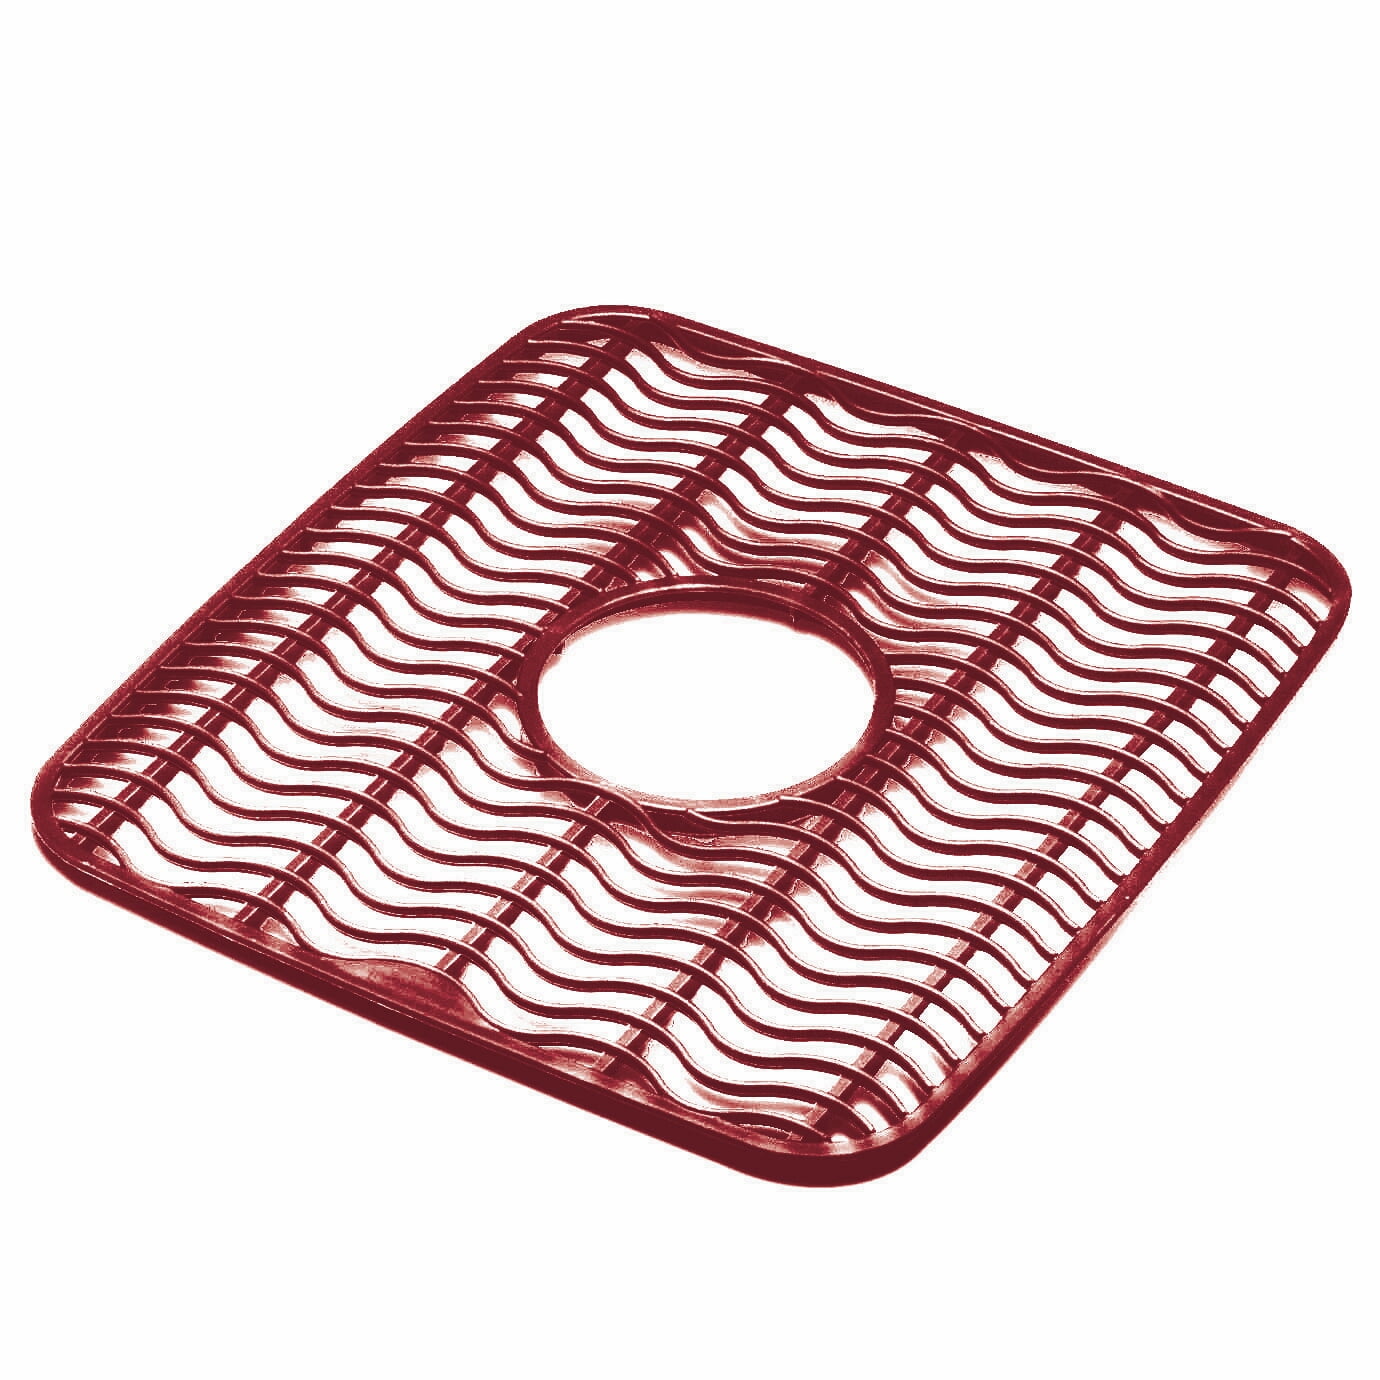 Small Antimicrobial Sink Mat - Black